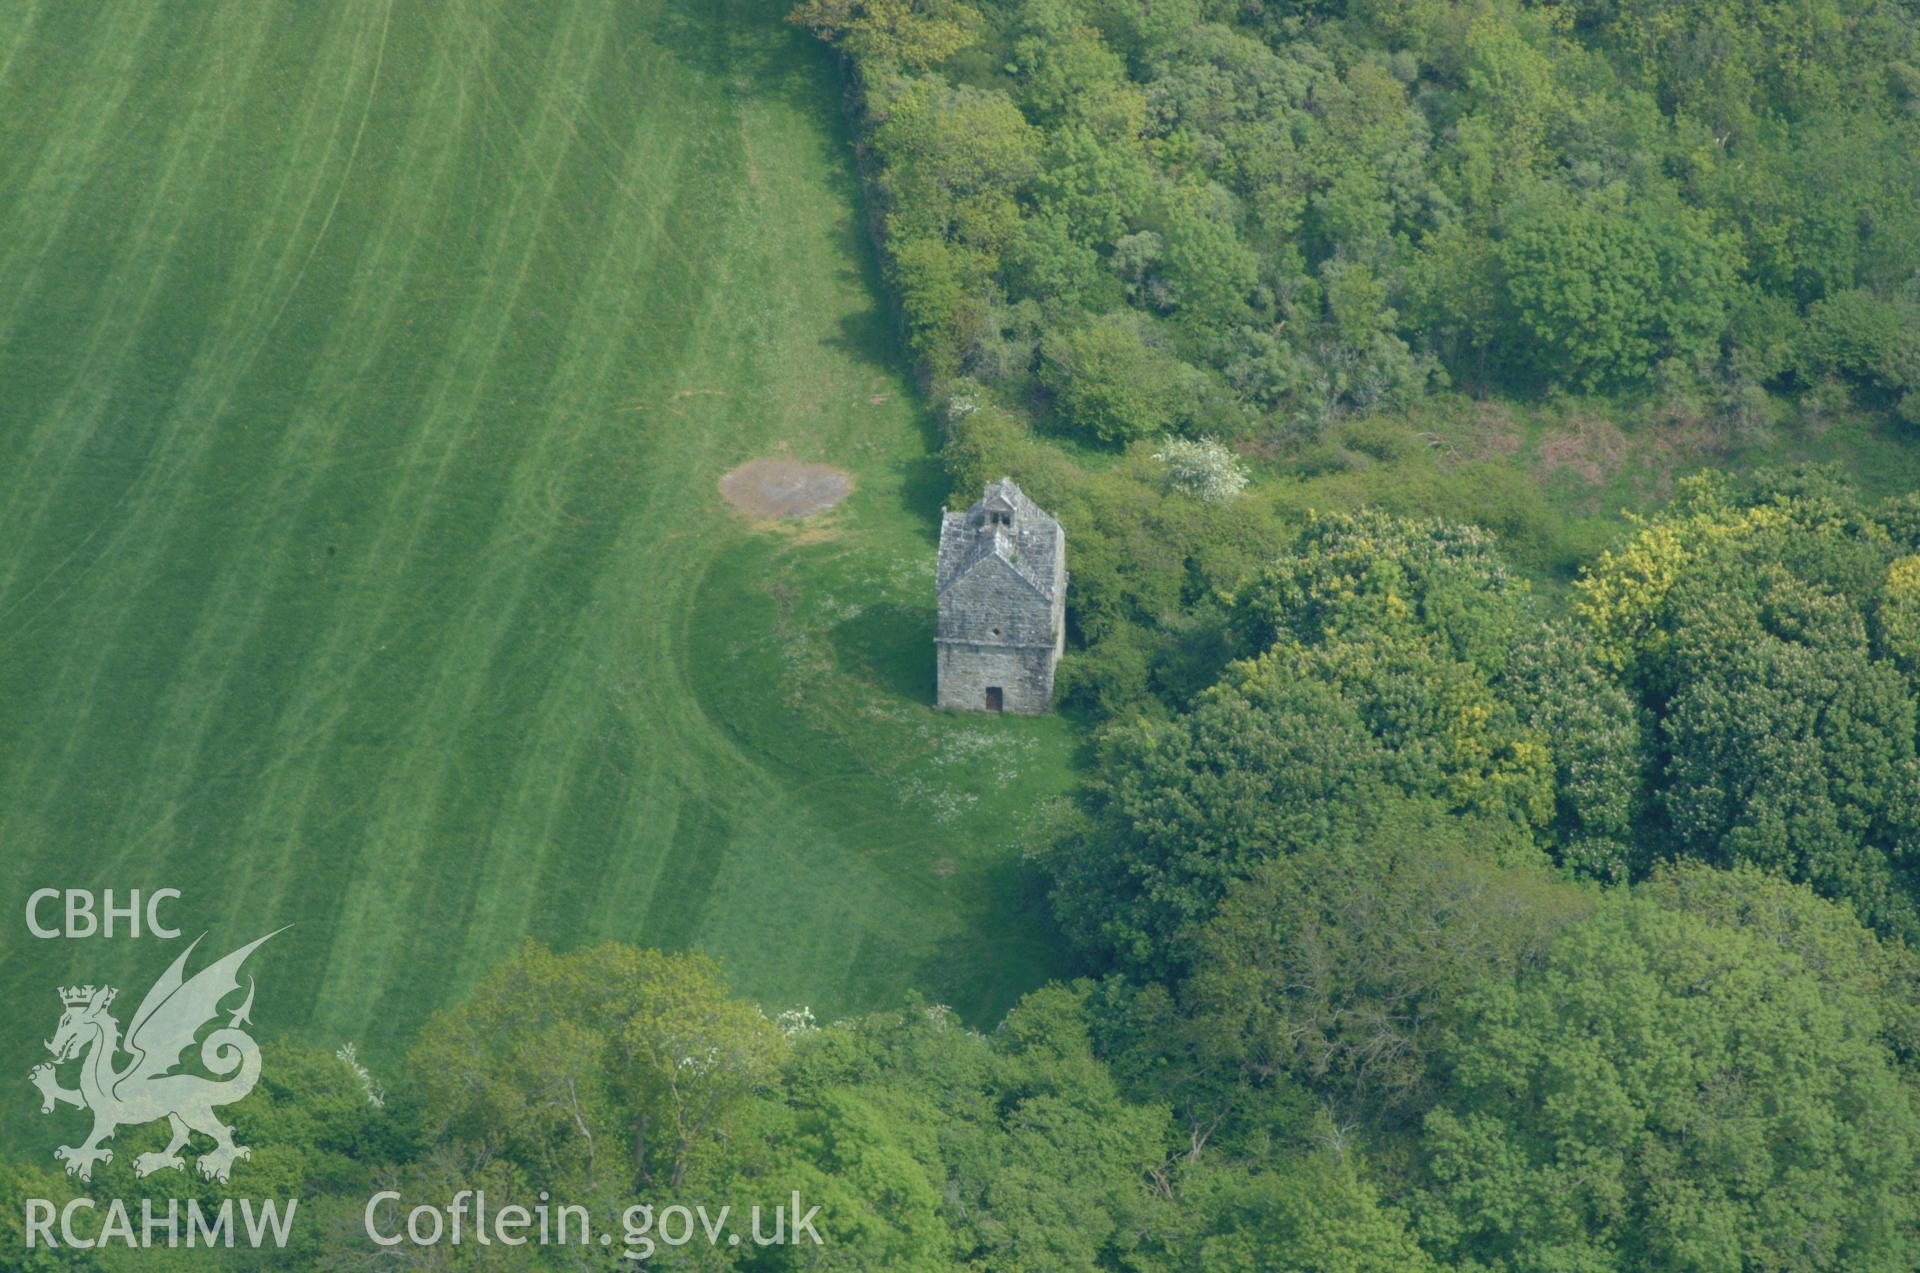 RCAHMW colour oblique aerial photograph of Llanellgradd Dovecote taken on 26/05/2004 by Toby Driver